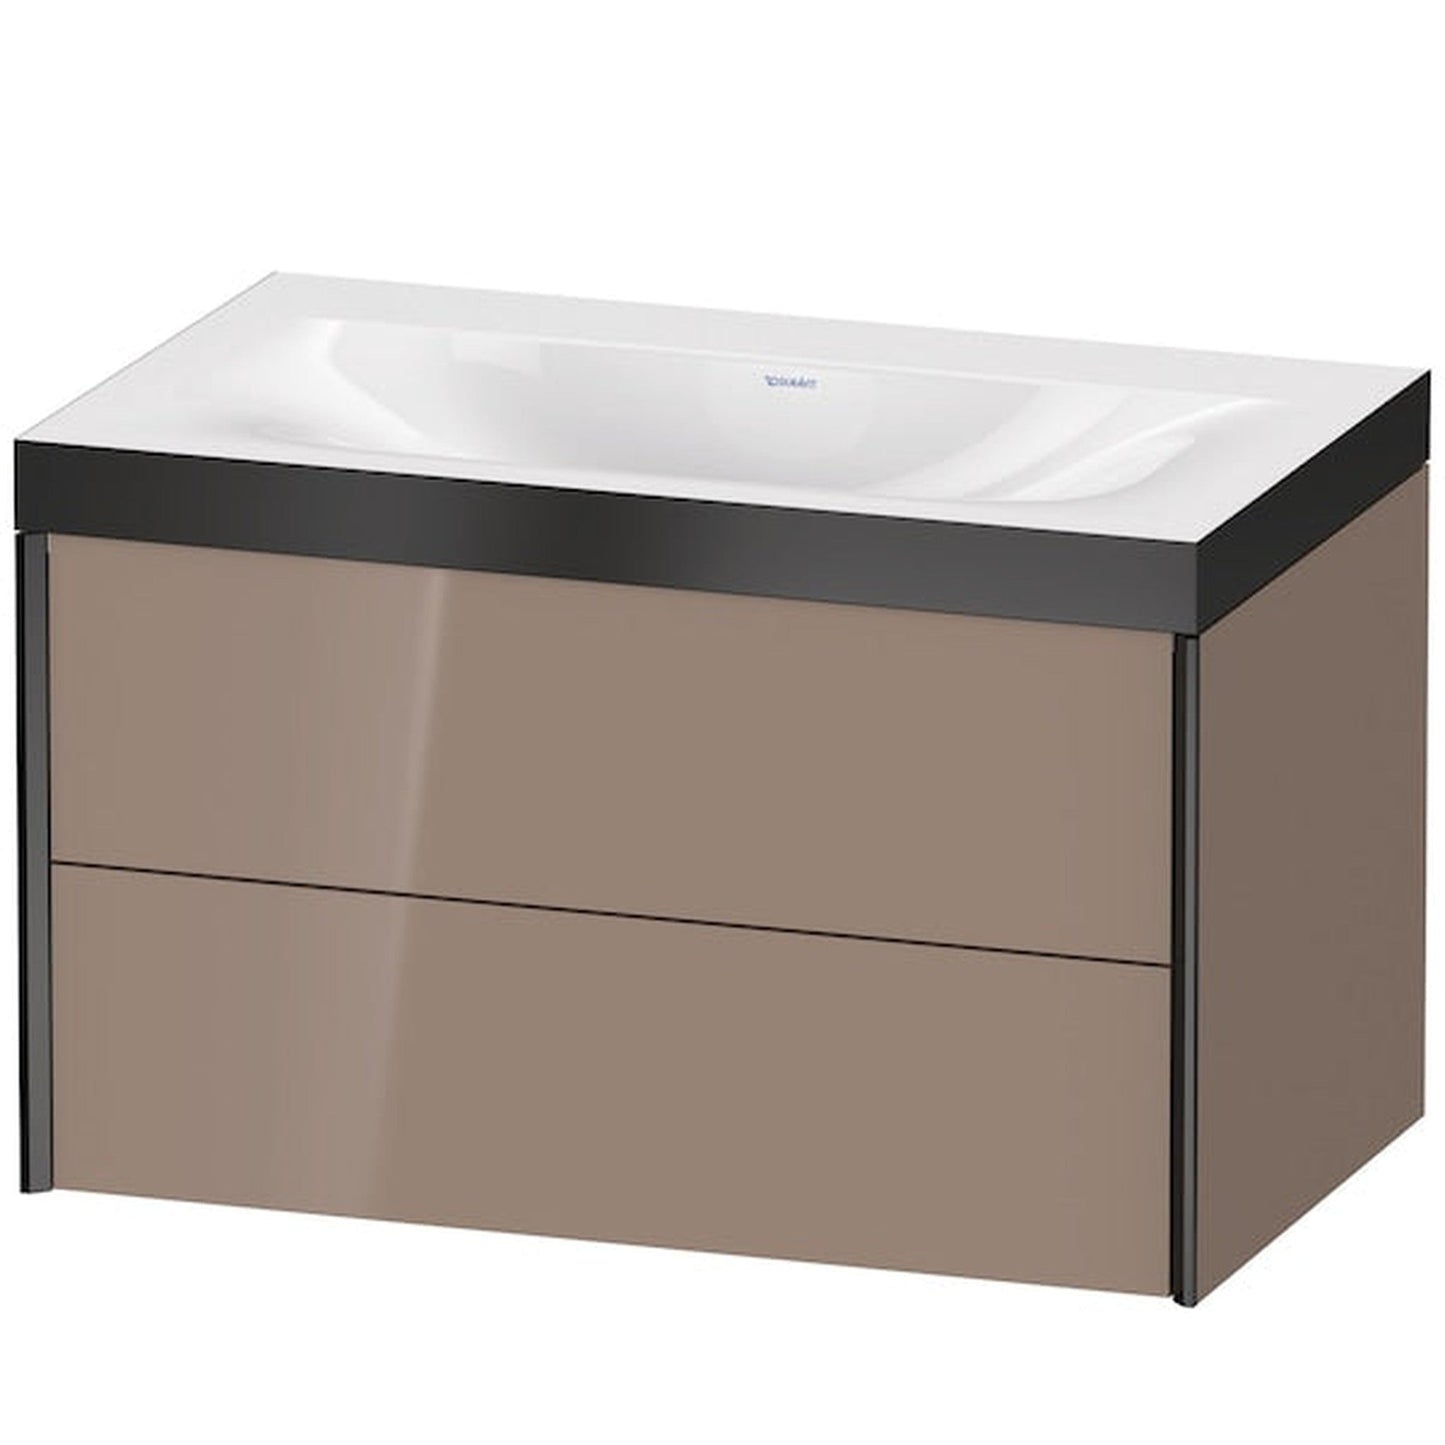 Duravit Xviu 31" x 20" x 19" Two Drawer C-Bonded Wall-Mount Vanity Kit Without Tap Hole, Cappuccino (XV4615NB286P)